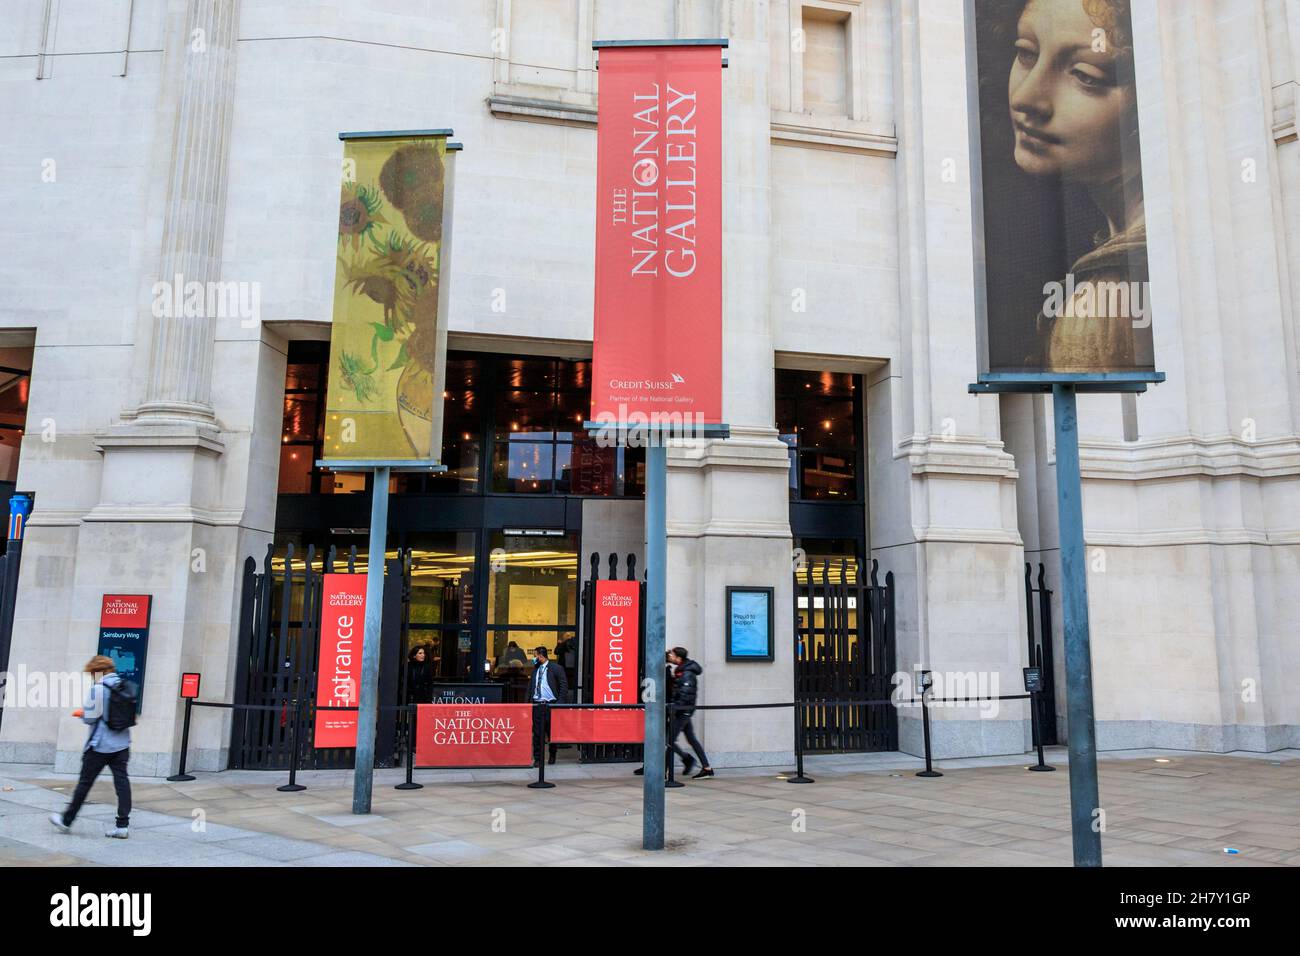 Public entrance to the National Gallery, London, UK Stock Photo